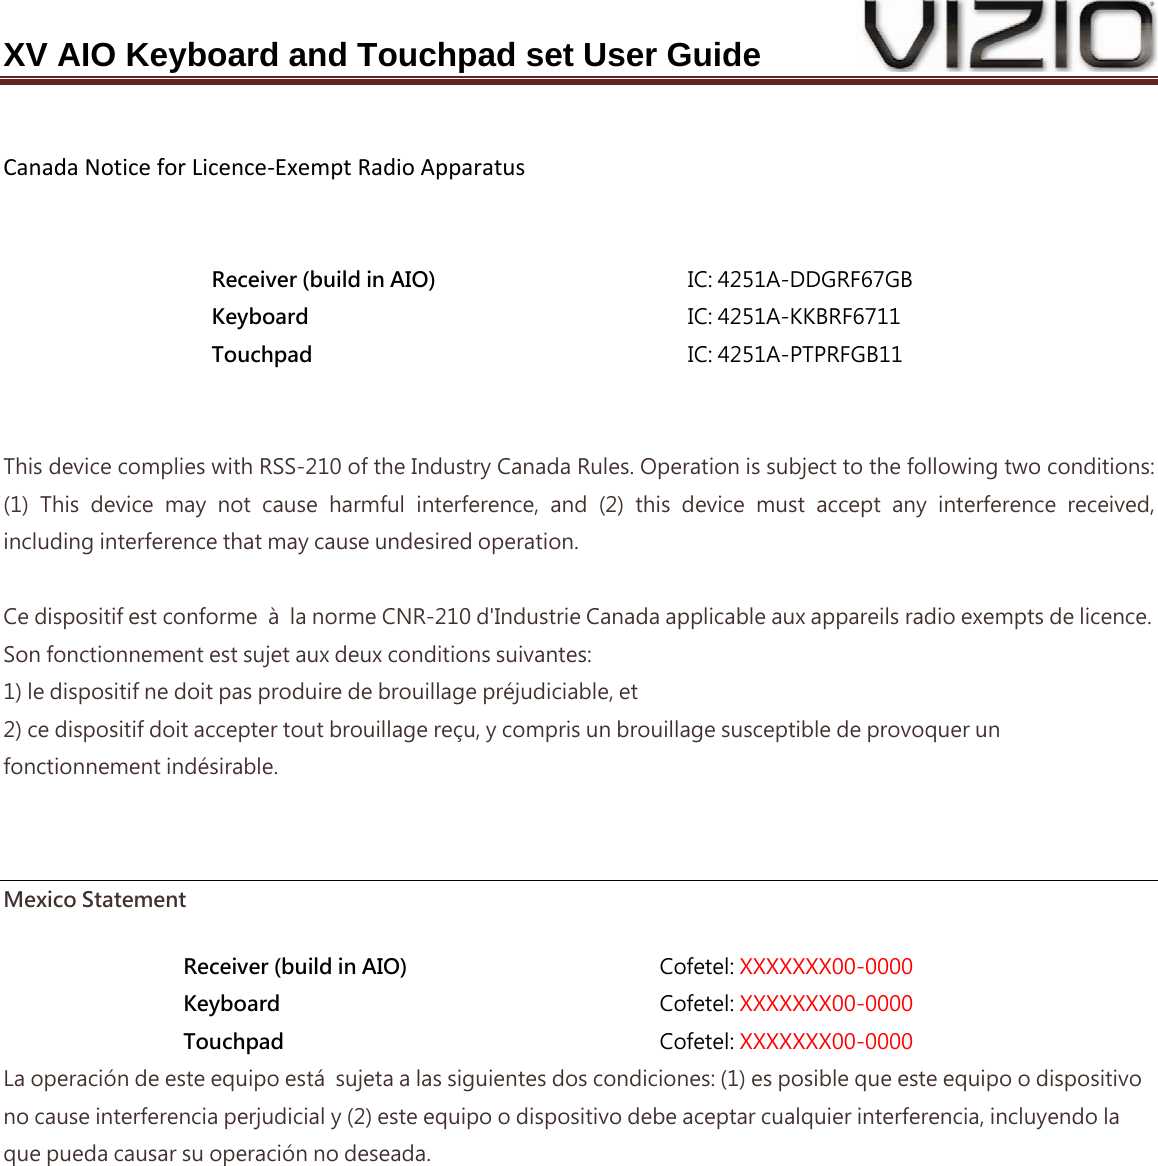 XV AIO Keyboard and Touchpad set User Guide  CanadaNoticeforLicence‐ExemptRadioApparatus  Receiver (build in AIO)  IC: 4251A-DDGRF67GB Keyboard  IC: 4251A-KKBRF6711 Touchpad  IC: 4251A-PTPRFGB11   This device complies with RSS-210 of the Industry Canada Rules. Operation is subject to the following two conditions: (1)  This  device  may  not  cause  harmful  interference,  and  (2)  this device must accept any interference received, including interference that may cause undesired operation.  Ce dispositif est conforme  à  la norme CNR-210 d&apos;Industrie Canada applicable aux appareils radio exempts de licence. Son fonctionnement est sujet aux deux conditions suivantes: 1) le dispositif ne doit pas produire de brouillage préjudiciable, et 2) ce dispositif doit accepter tout brouillage reçu, y compris un brouillage susceptible de provoquer un fonctionnement indésirable.   Mexico Statement Receiver (build in AIO)  Cofetel: XXXXXXX00-0000 Keyboard  Cofetel: XXXXXXX00-0000 Touchpad  Cofetel: XXXXXXX00-0000 La operación de este equipo está  sujeta a las siguientes dos condiciones: (1) es posible que este equipo o dispositivo no cause interferencia perjudicial y (2) este equipo o dispositivo debe aceptar cualquier interferencia, incluyendo la que pueda causar su operación no deseada. 